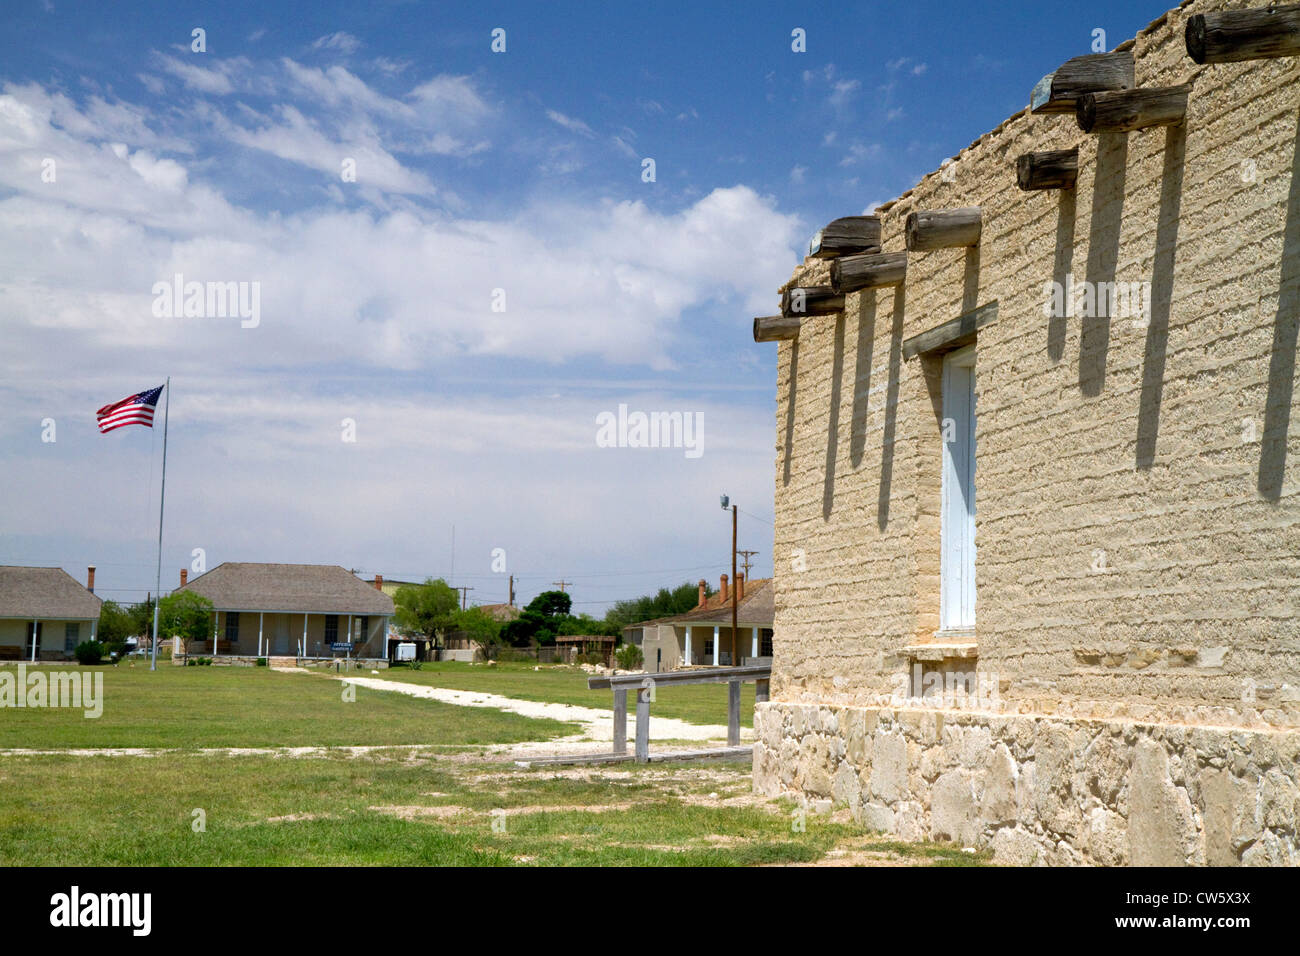 Historic fort site and adobe wall at Fort Stockton, Texas, USA. Stock Photo